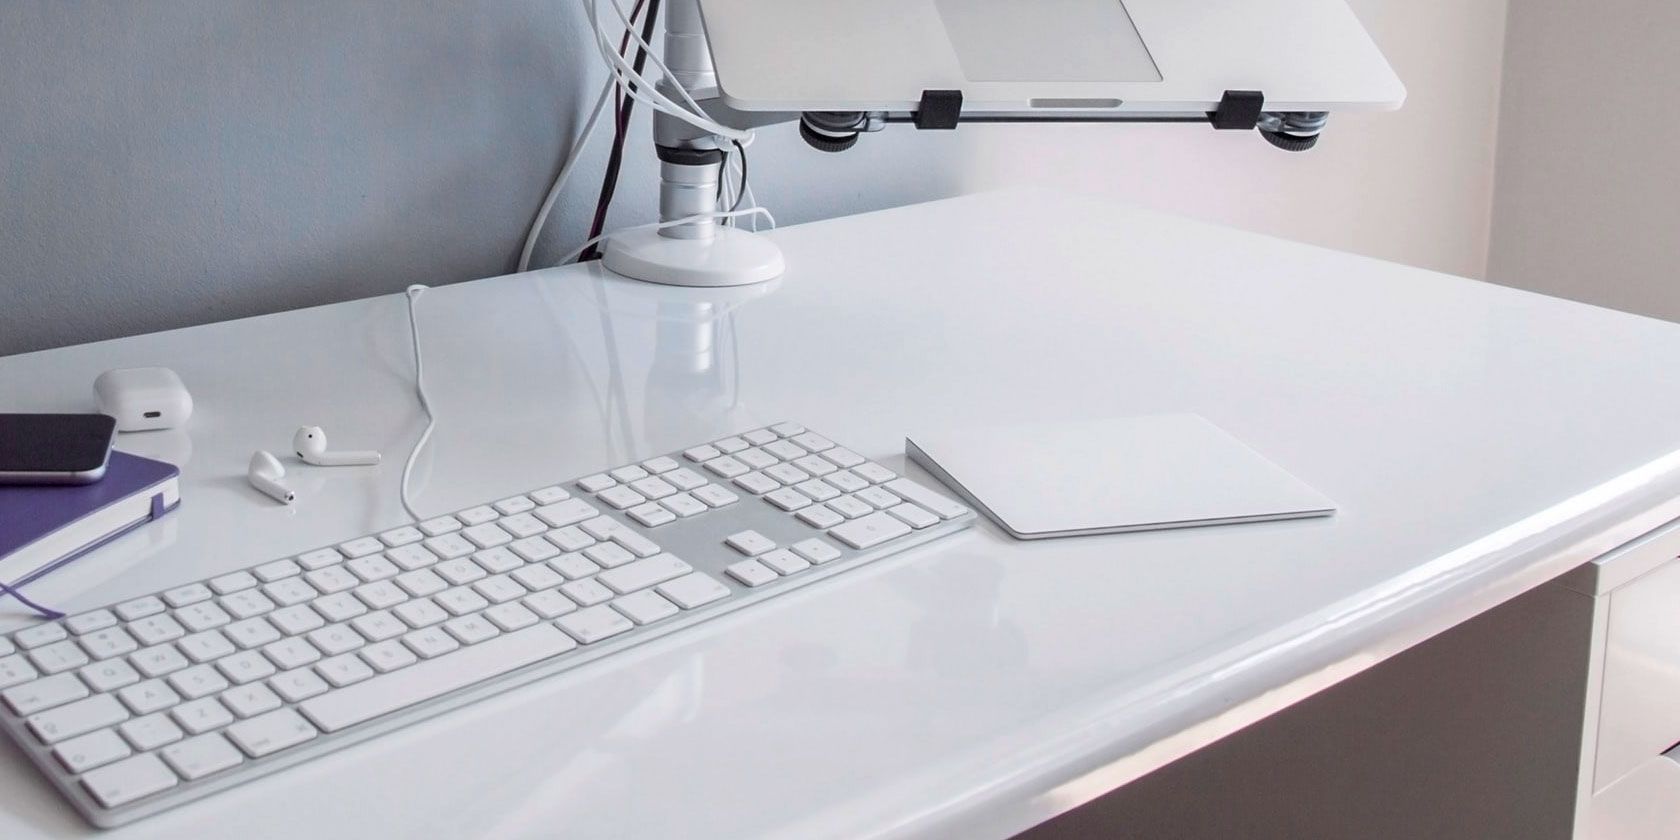 5 Reasons Why A Magic Trackpad Is Better Than A Magic Mouse